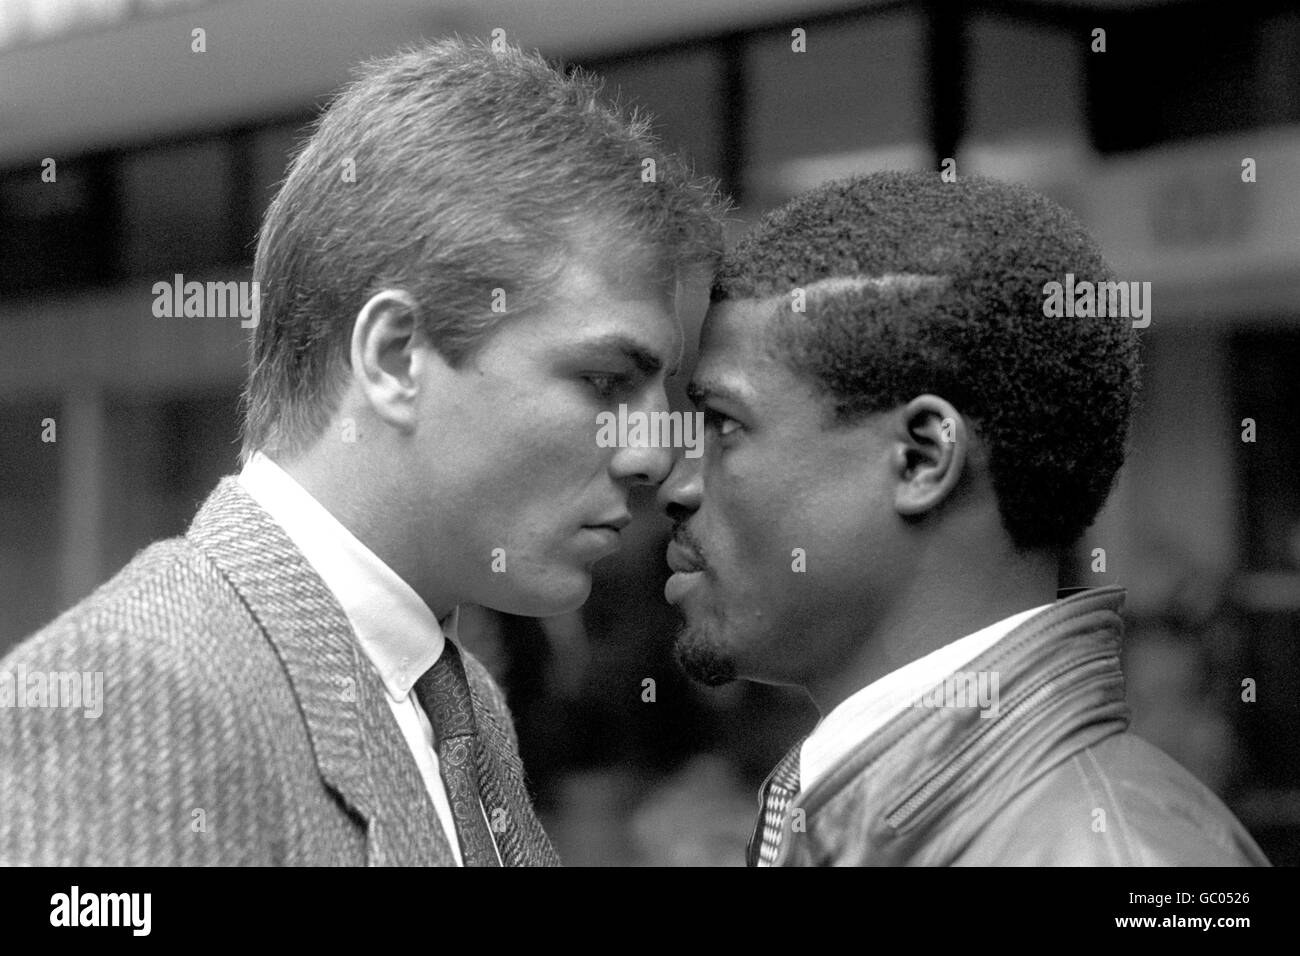 Londoner Mark Kaylor (l) and Coventry's Errol Christie (r) square upto each other at a press conference. The two fighters later traded punches in front of the cameras. Stock Photo